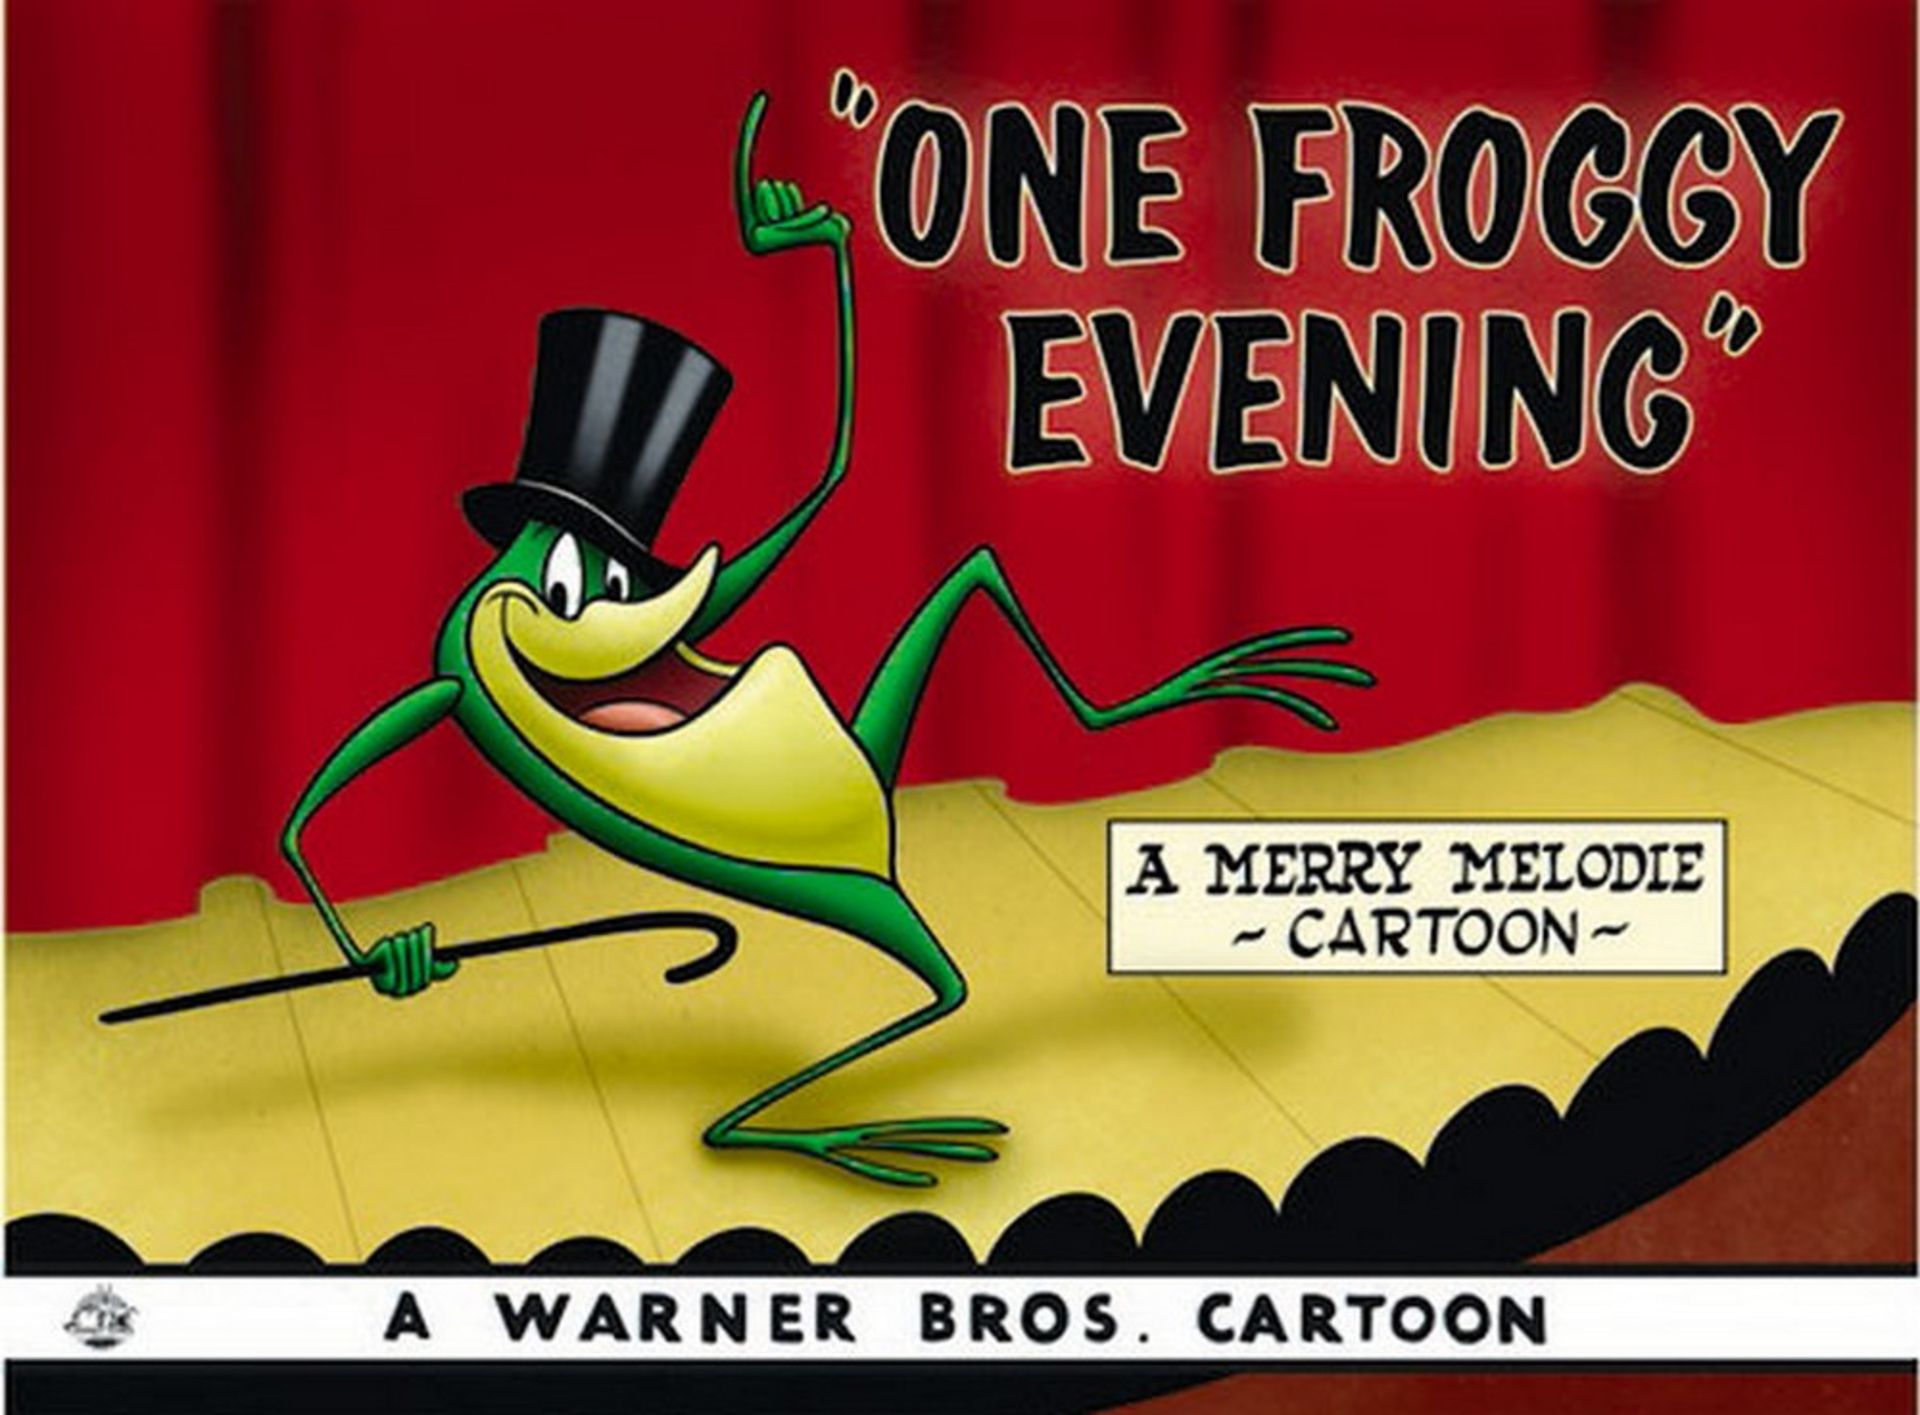 Warner Brothers Hologram One Froggy Evening - Image 2 of 2